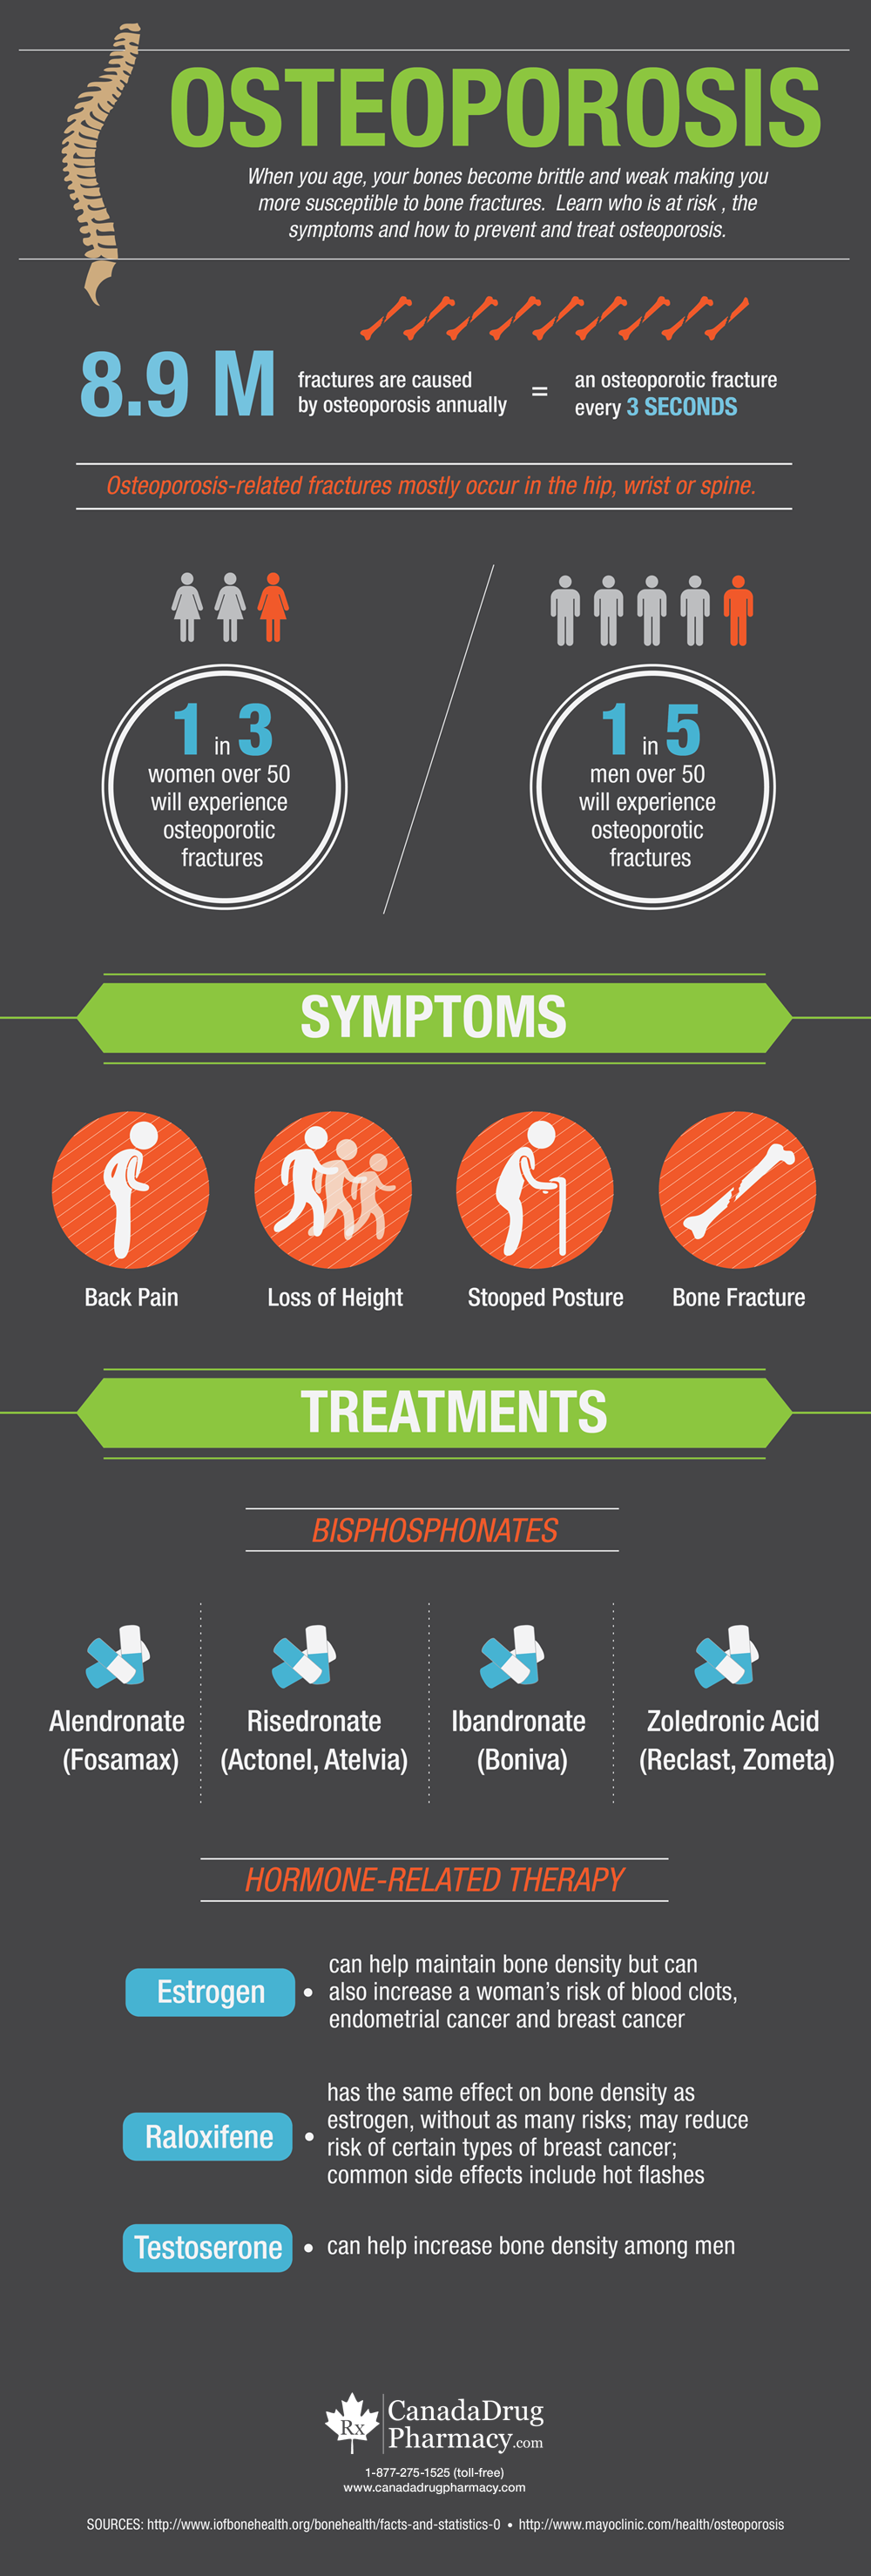 Osteoporosis Facts and Treatments